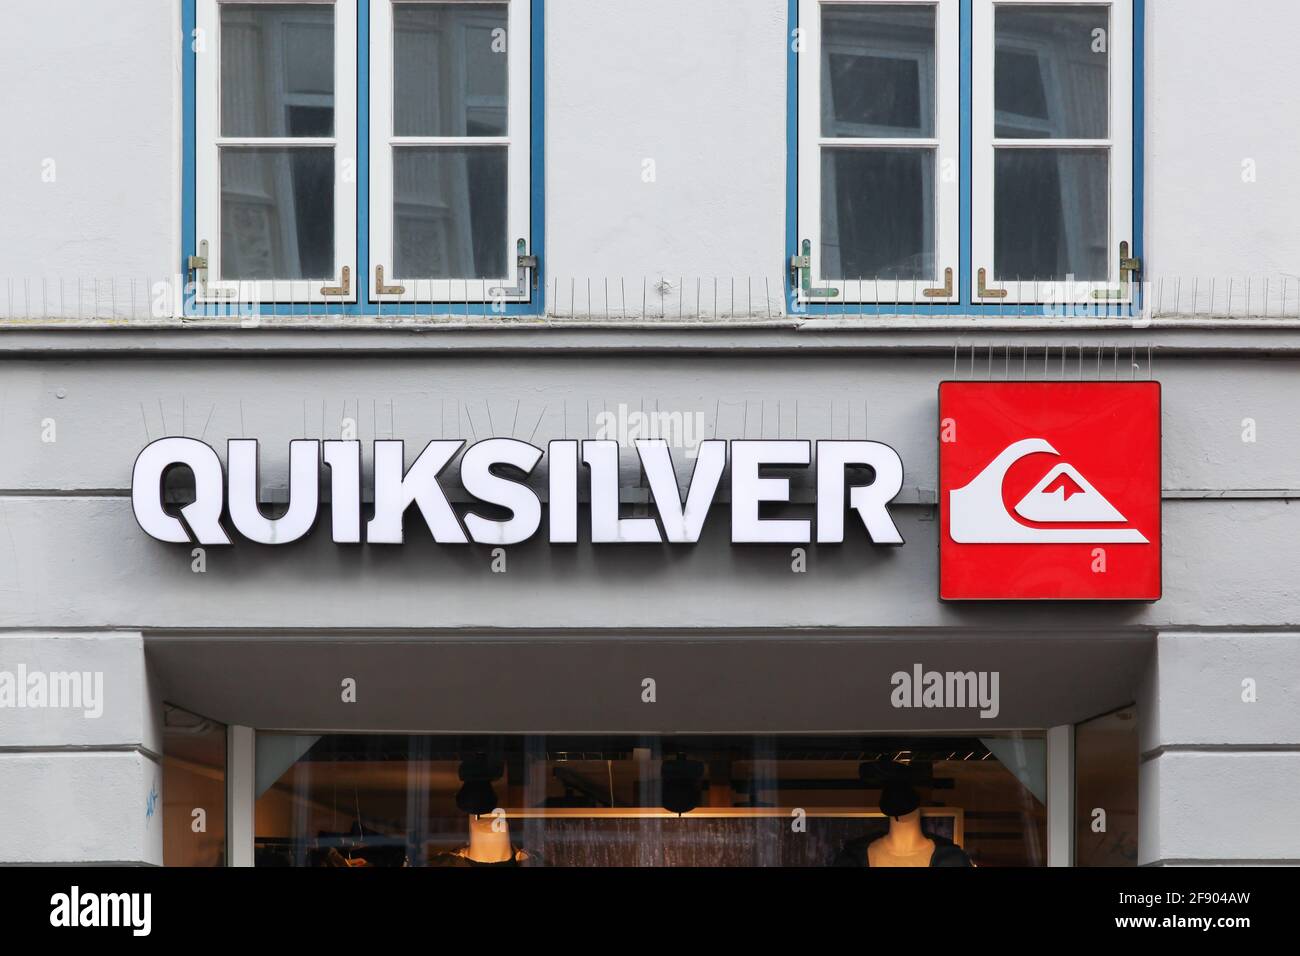 Flensburg, Germany - December 14, 2017: Quiksilver sign on a wall. Quiksilver is a brand of surf-inspired apparel and accessories Stock Photo